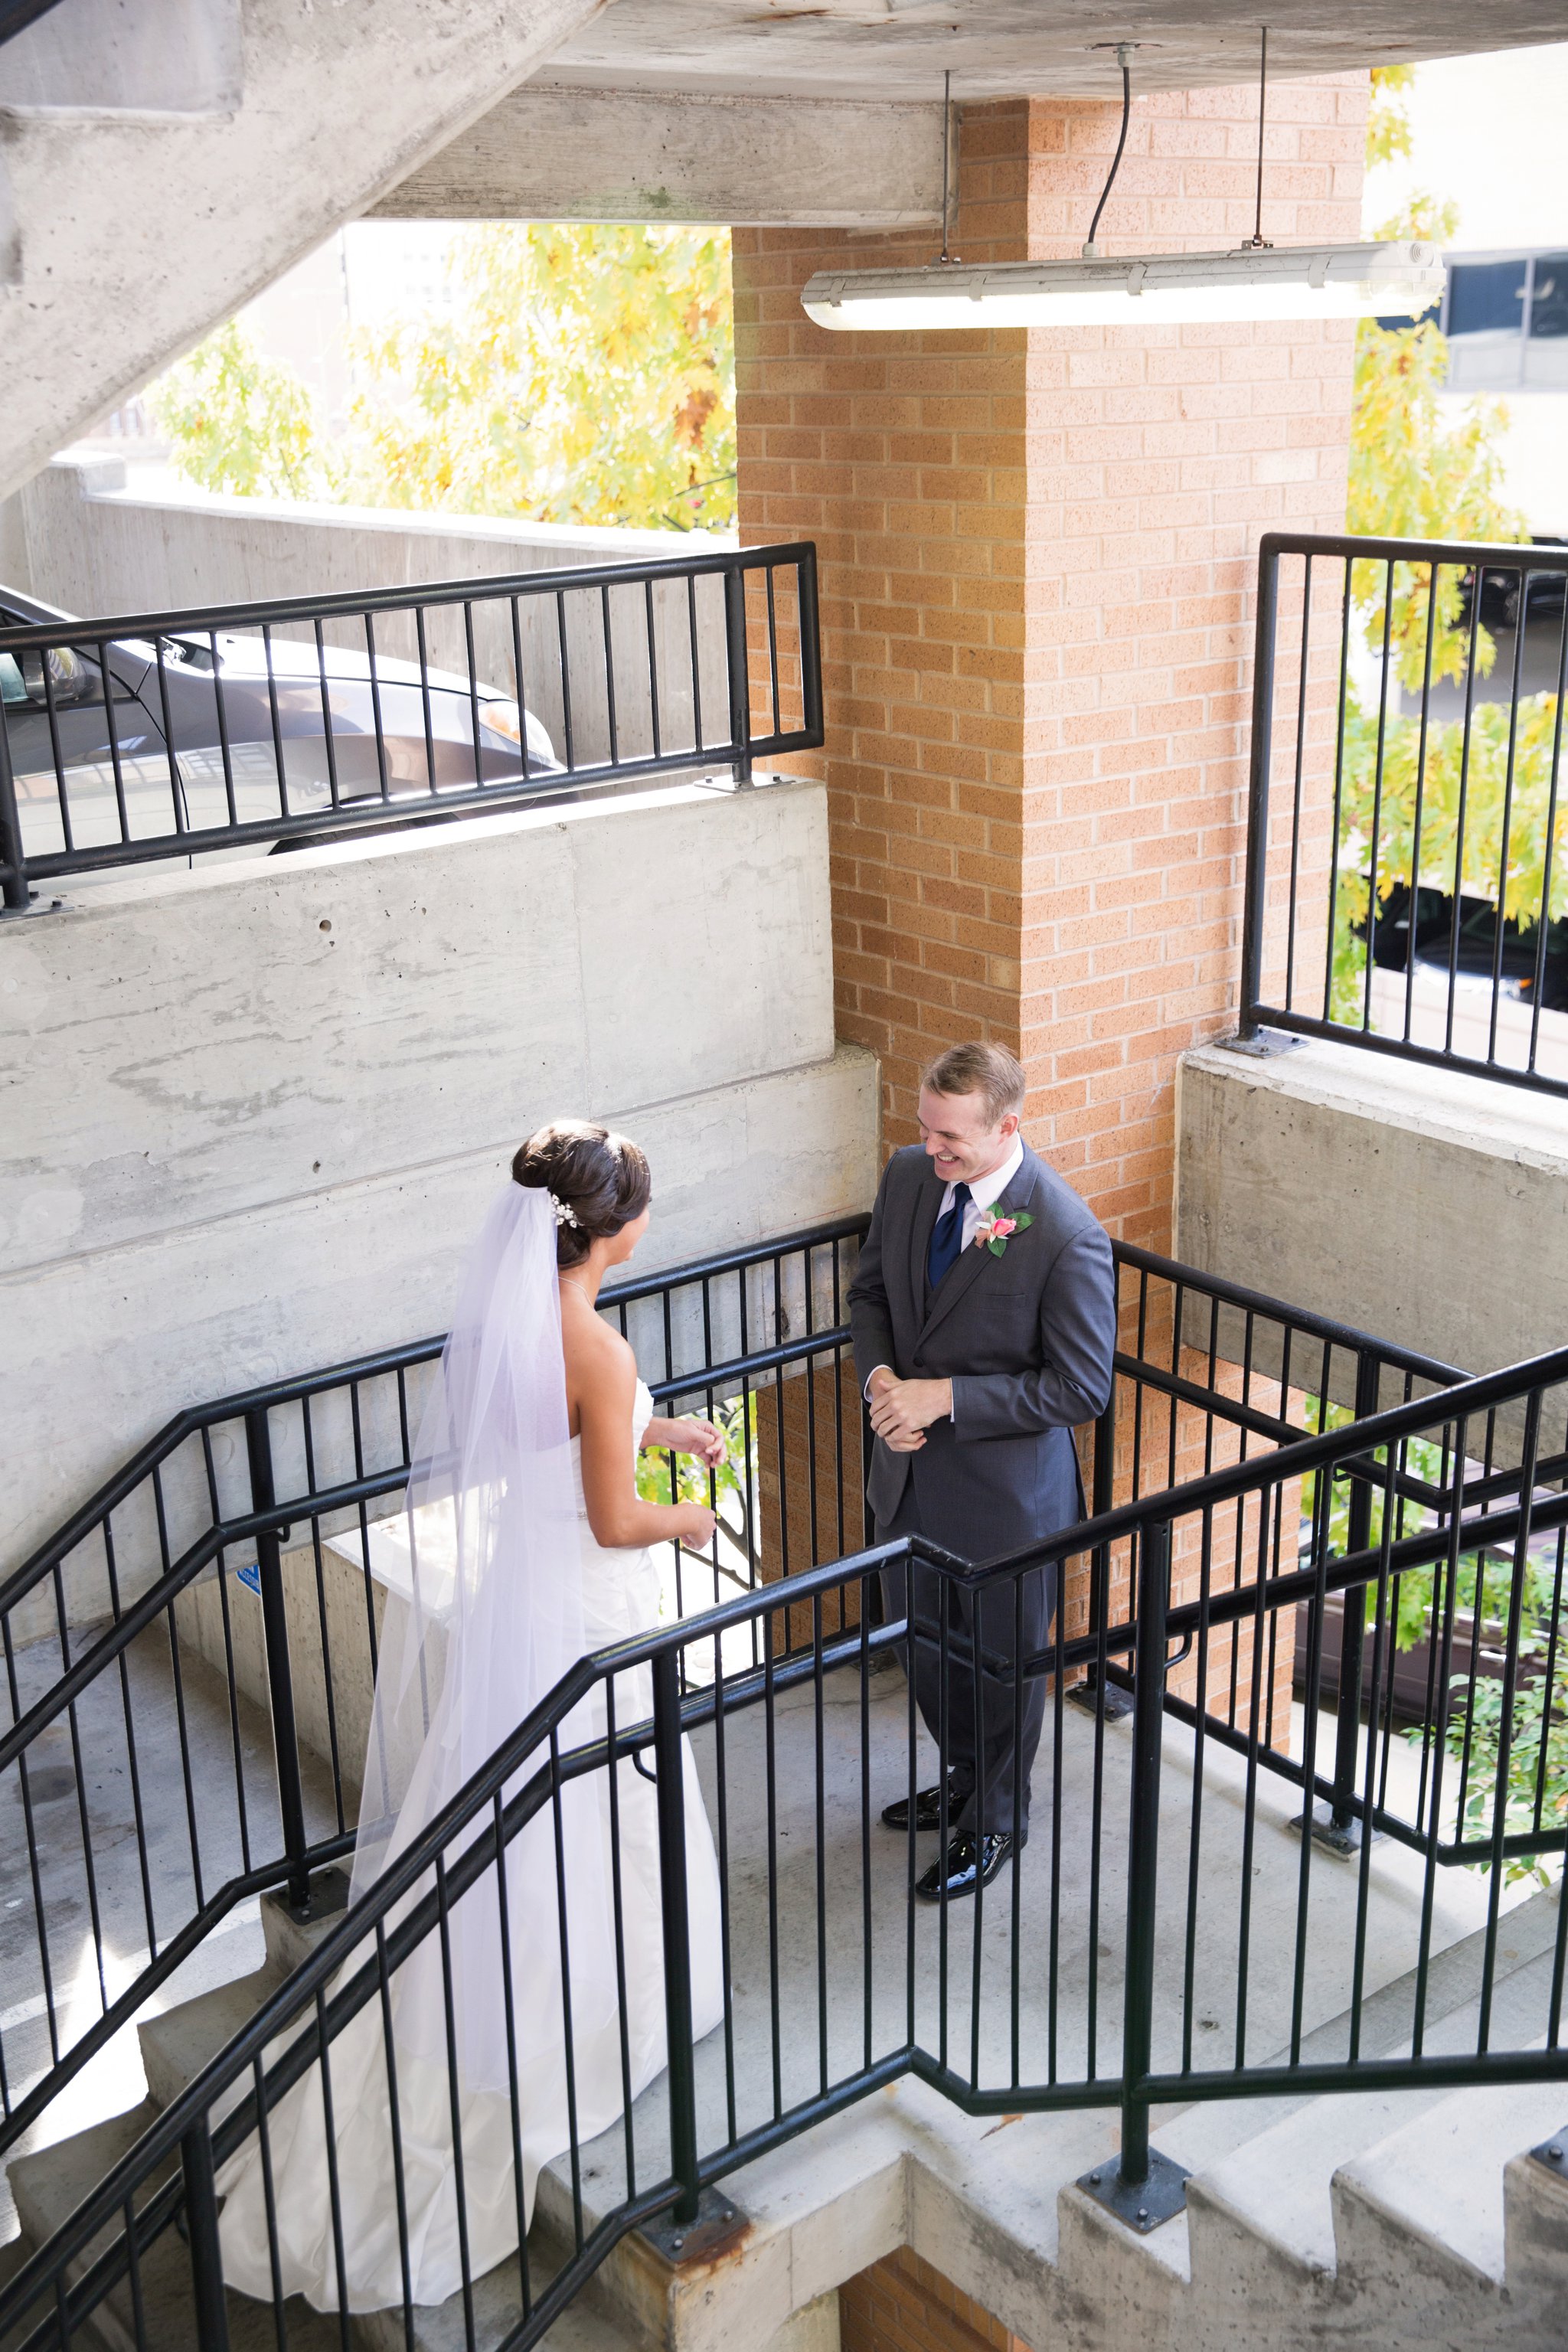 wedding | wedding photos | wedding photography | images by feliciathephotographer.com | Country Club Plaza | Kansas City | Unity Temple | first look | bride and groom | staircase meeting | groom reaction 